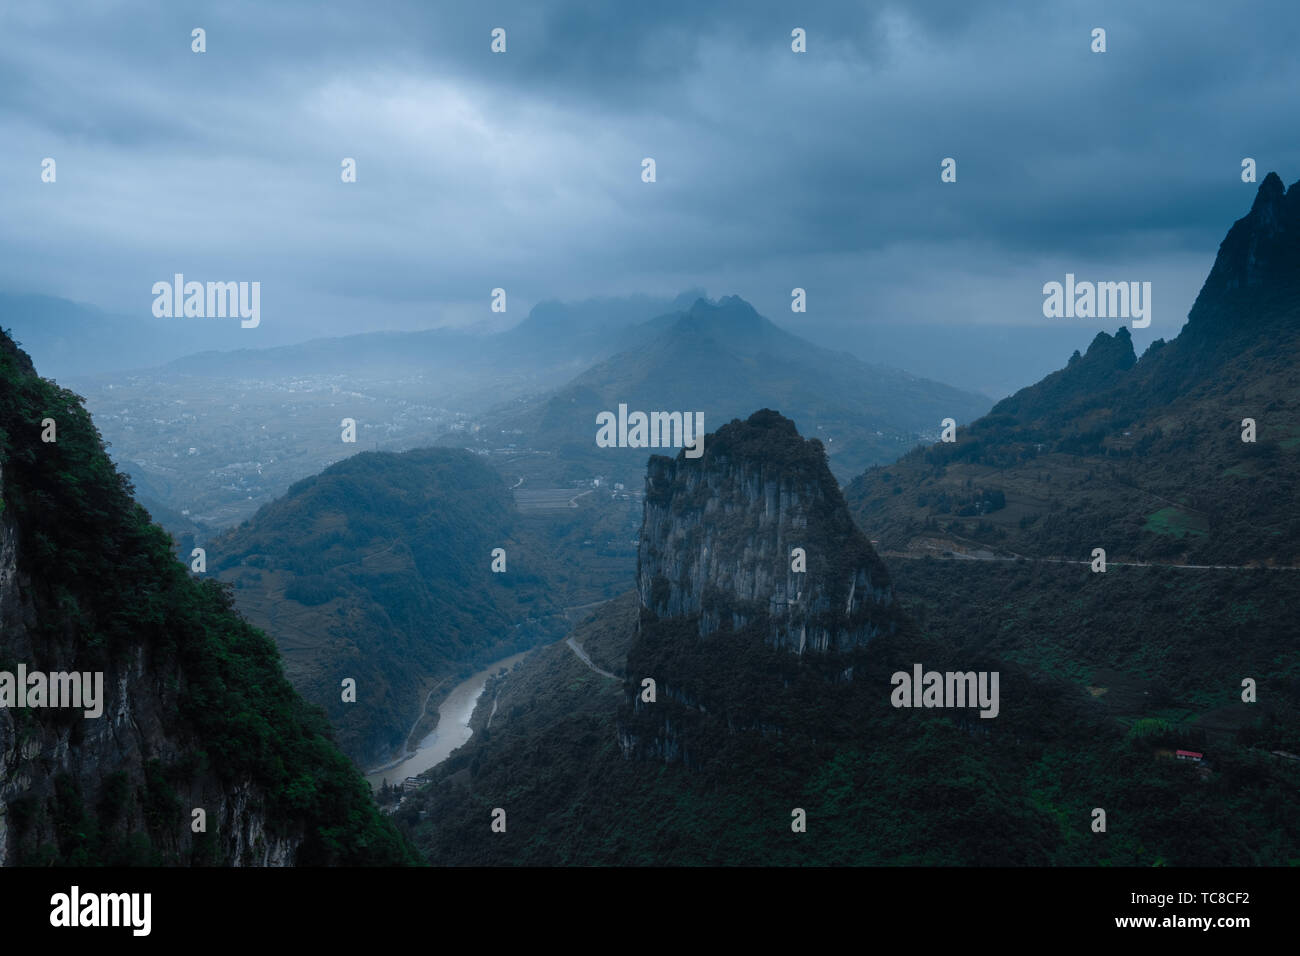 Photos of mountains and rivers in Enshi, Hubei Province Stock Photo